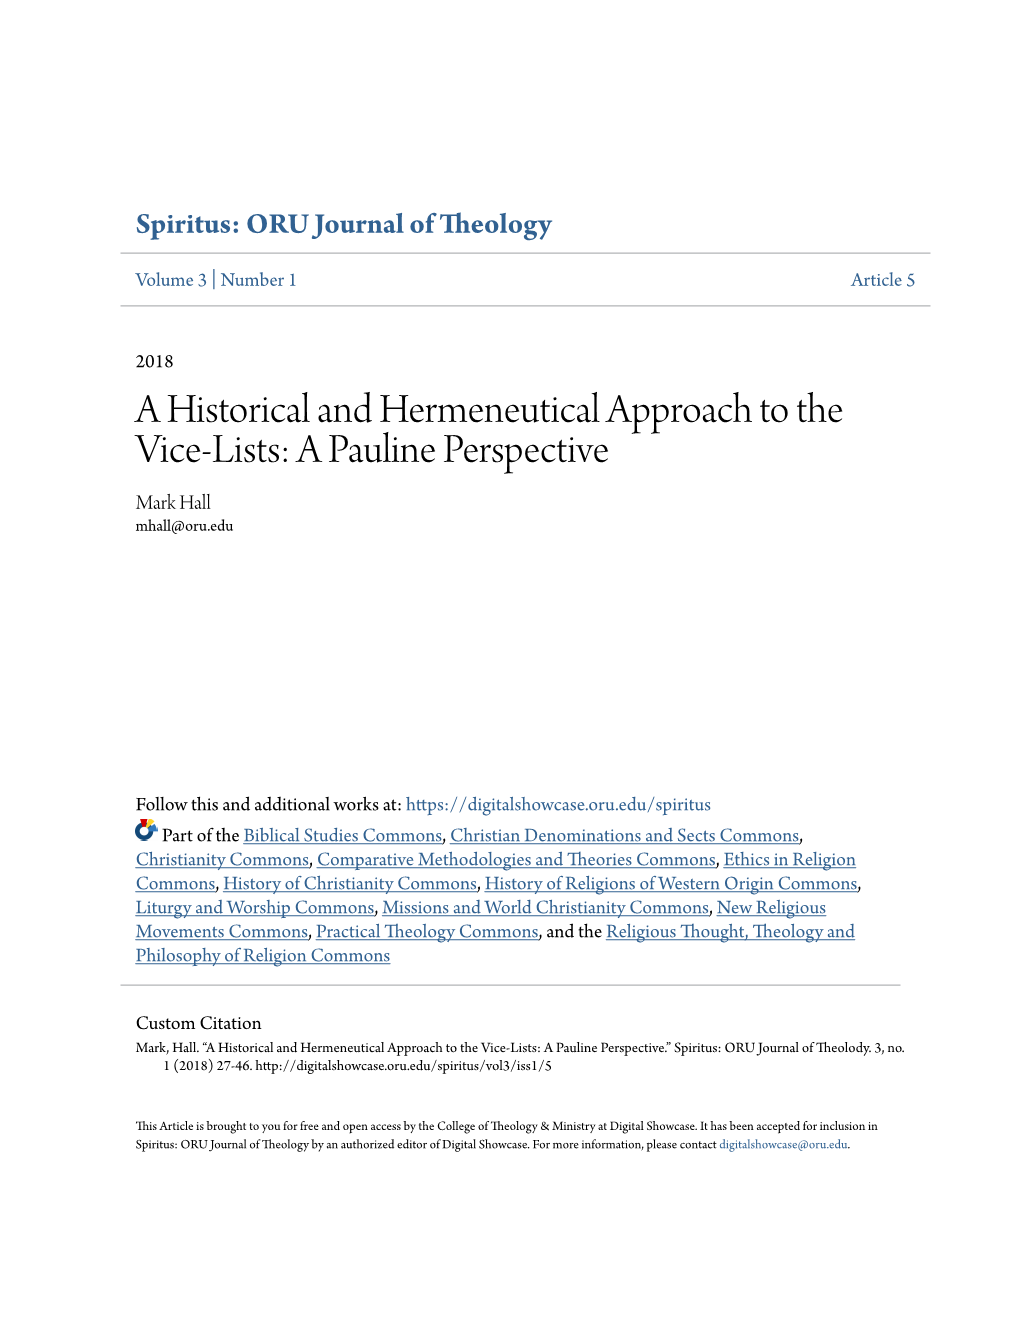 A Historical and Hermeneutical Approach to the Vice-Lists: a Pauline Perspective Mark Hall Mhall@Oru.Edu